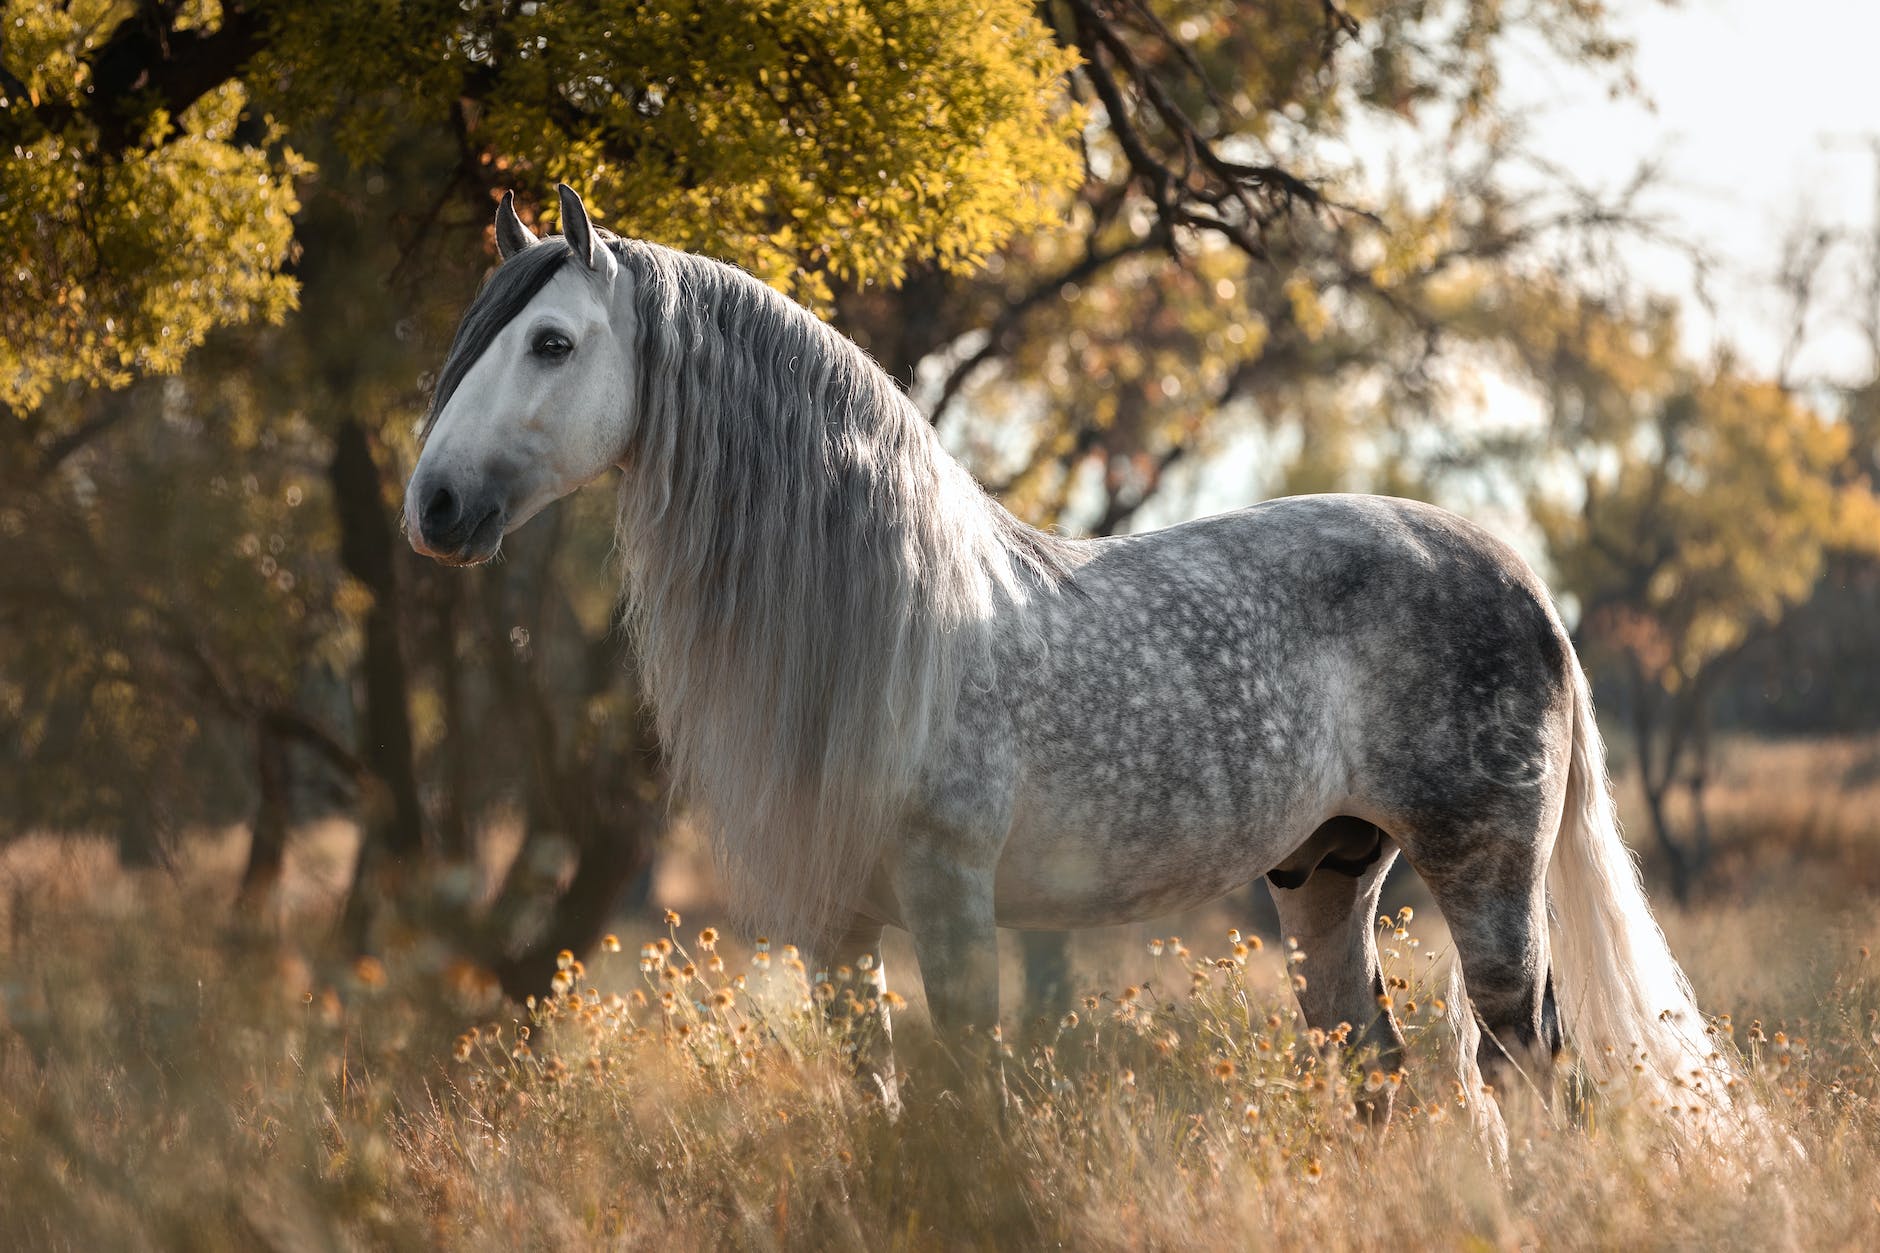 Dapple Gray Horse Facts with Pictures